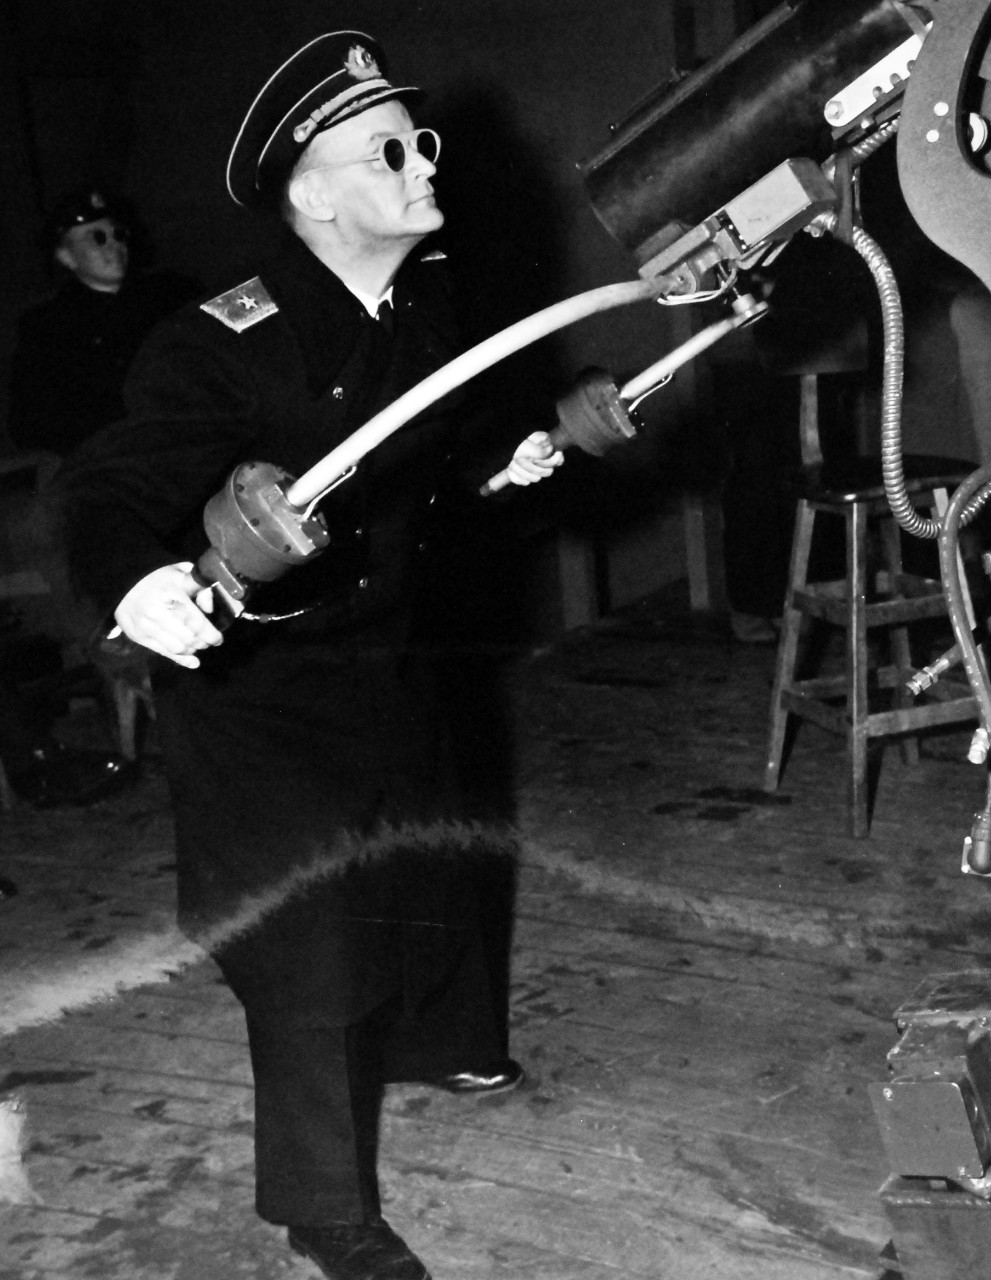 80-G-342179:  Naval Operating Base, Adak, Alaska, July 1945.   Soviet Rear Admiral Popov, firing the anti-aircraft gunnery trainer at NOB Adak, Alaska, 6 July 1945.    Official U.S. Navy Photograph, now in the collections of the National Archives.  (2013/08/21).  